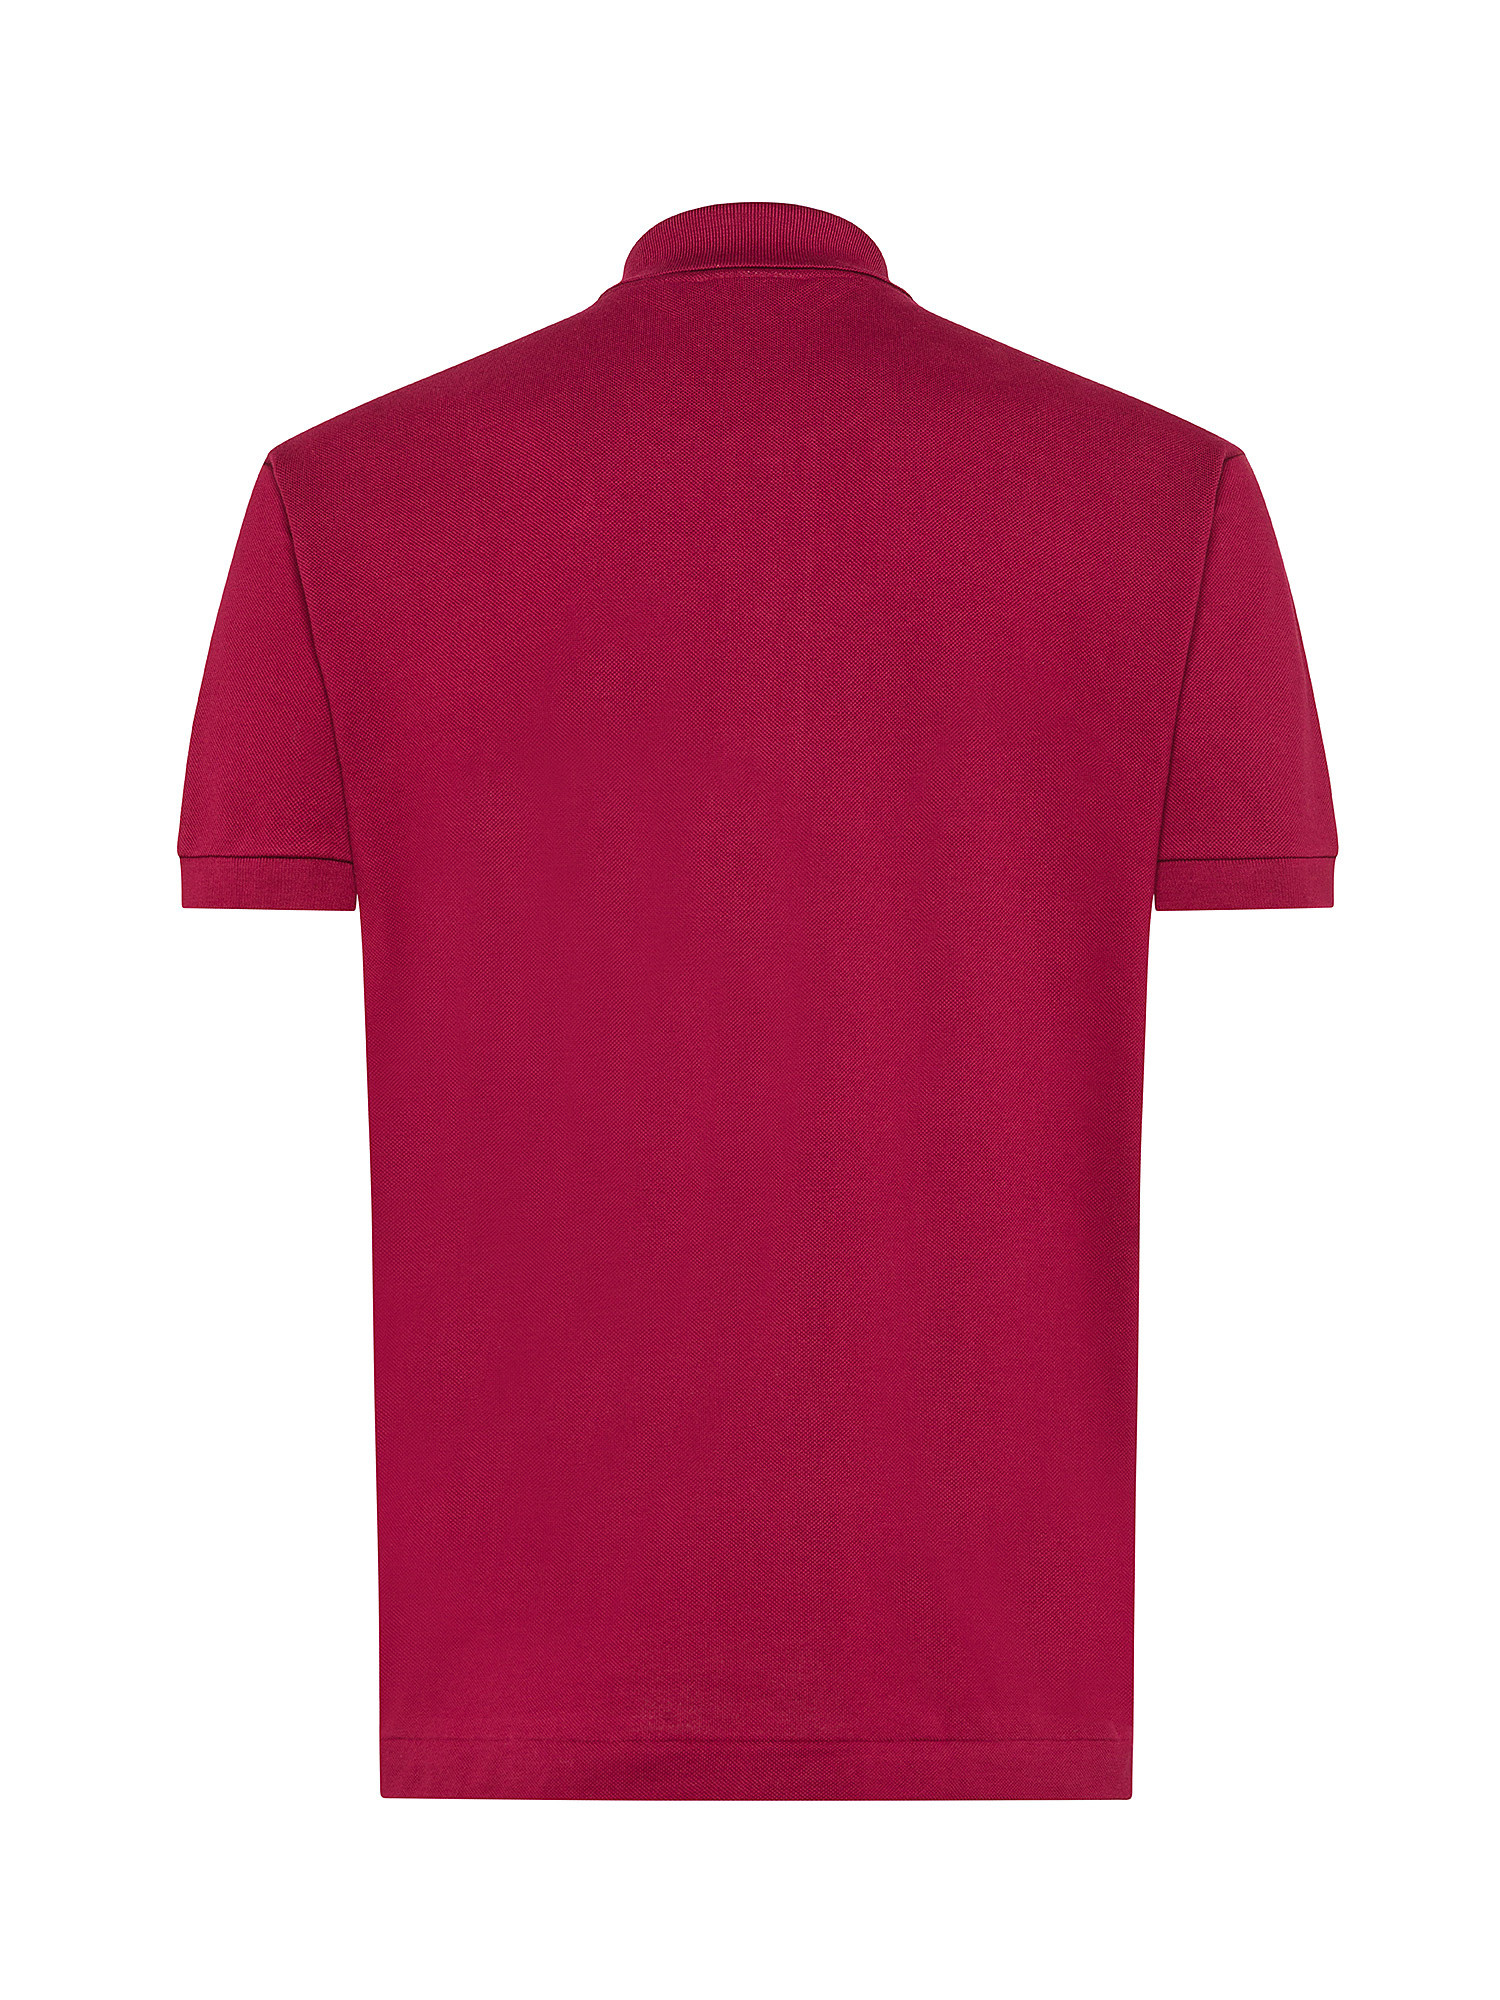 Lacoste - Classic cut polo shirt in petit piquè cotton, Dark Red, large image number 1